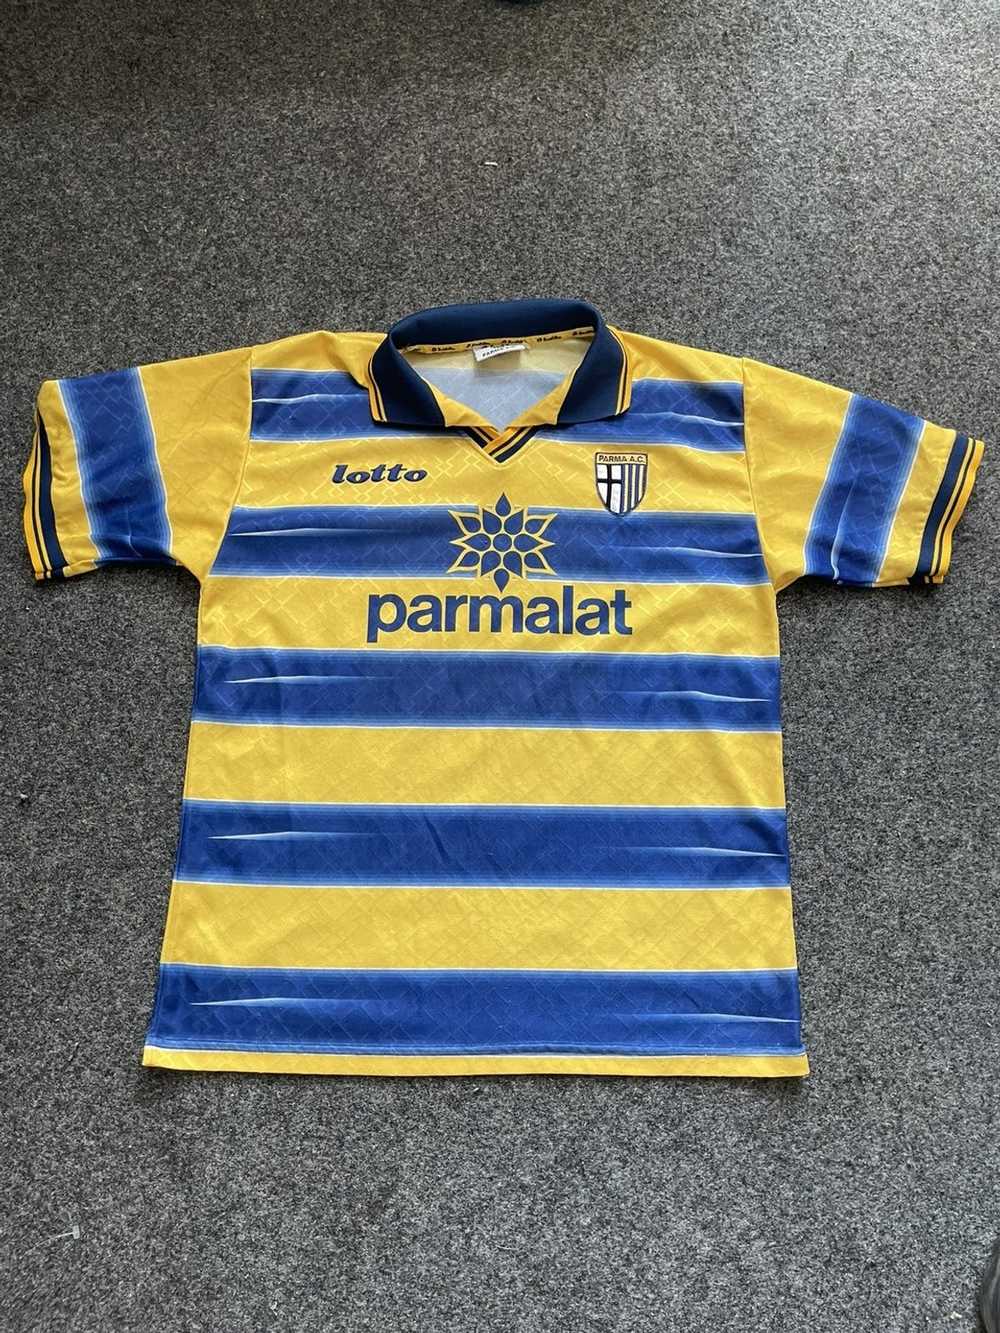 1999/00 Parma AC #32 Home Jersey – FeelsGood FC